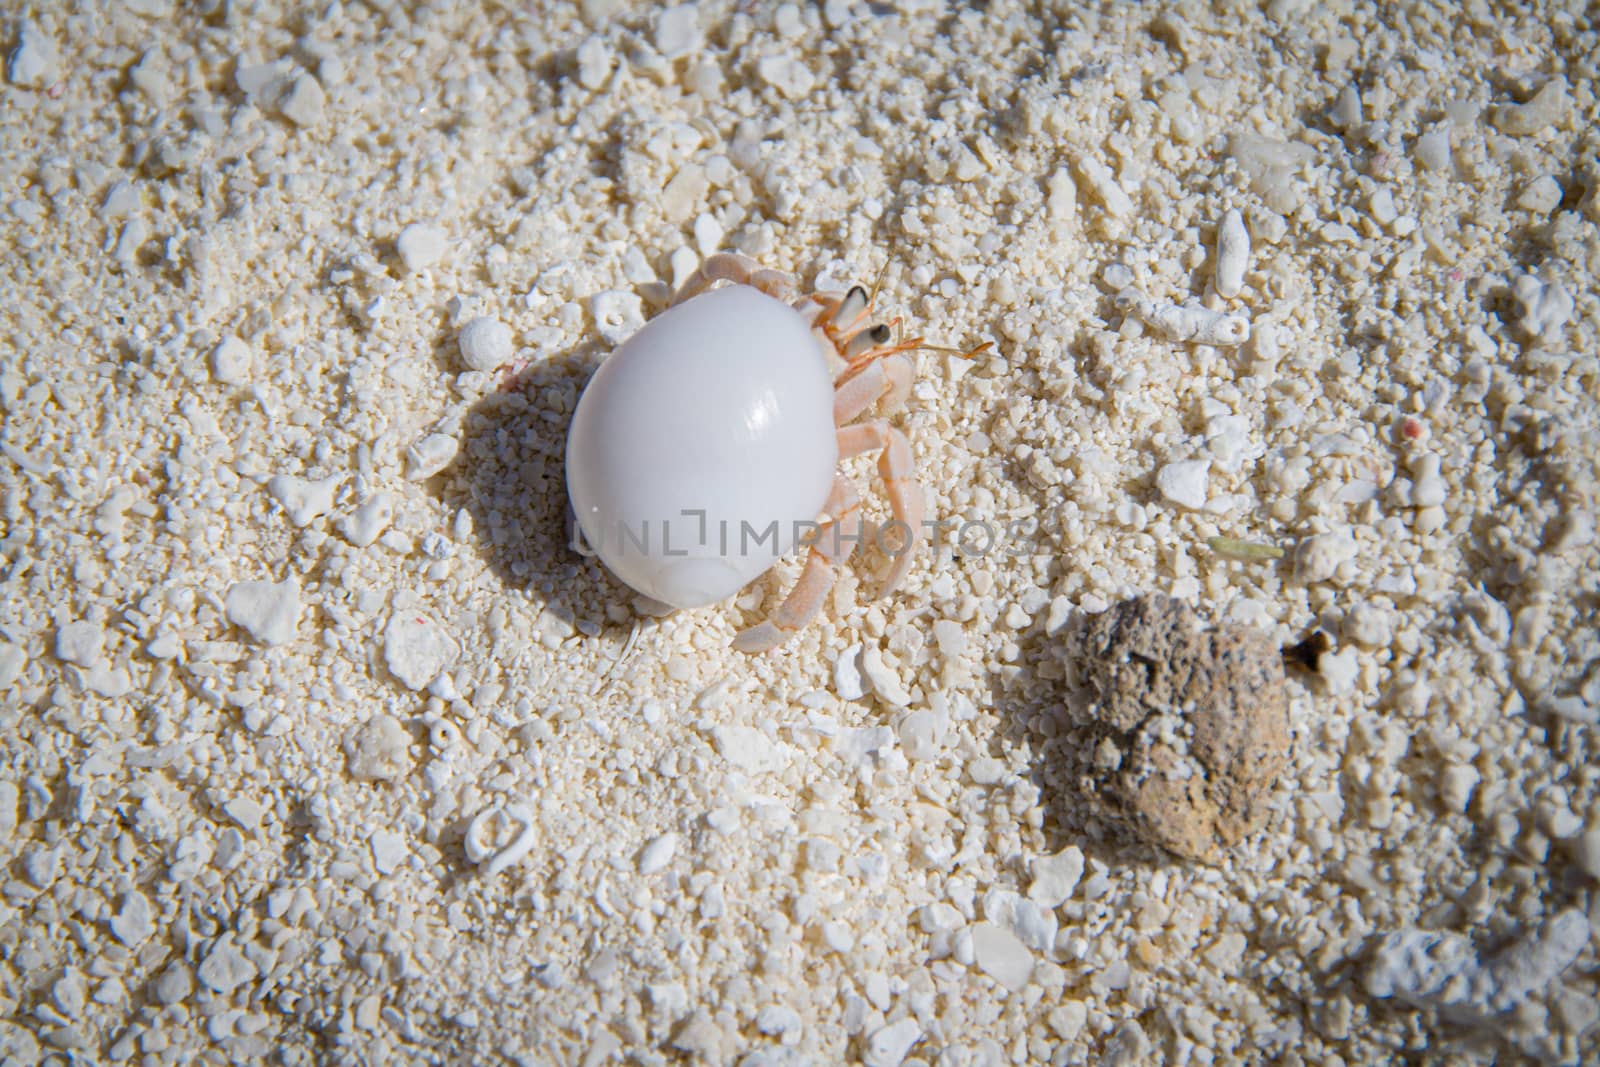 Hermit crab on beach the at a resotrt in Maldives